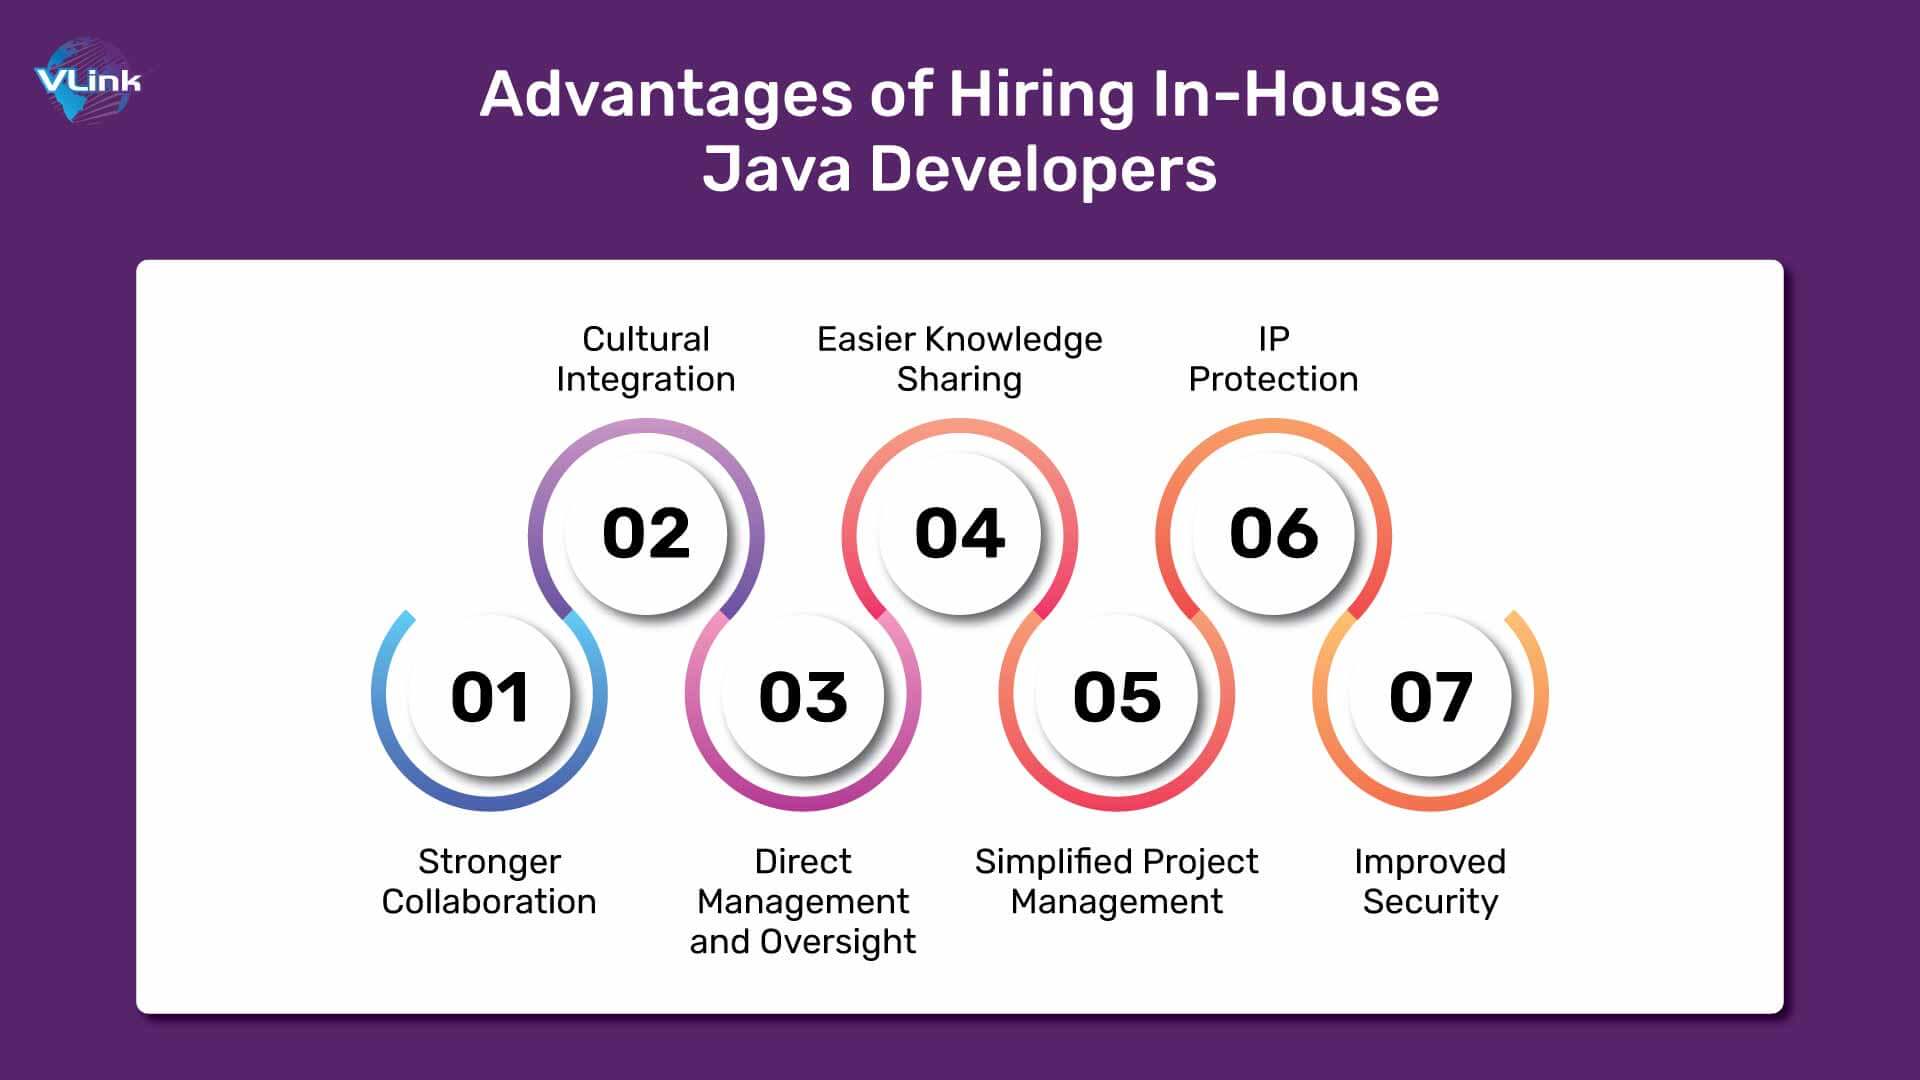 Advantages of Hiring In-House Java Developers